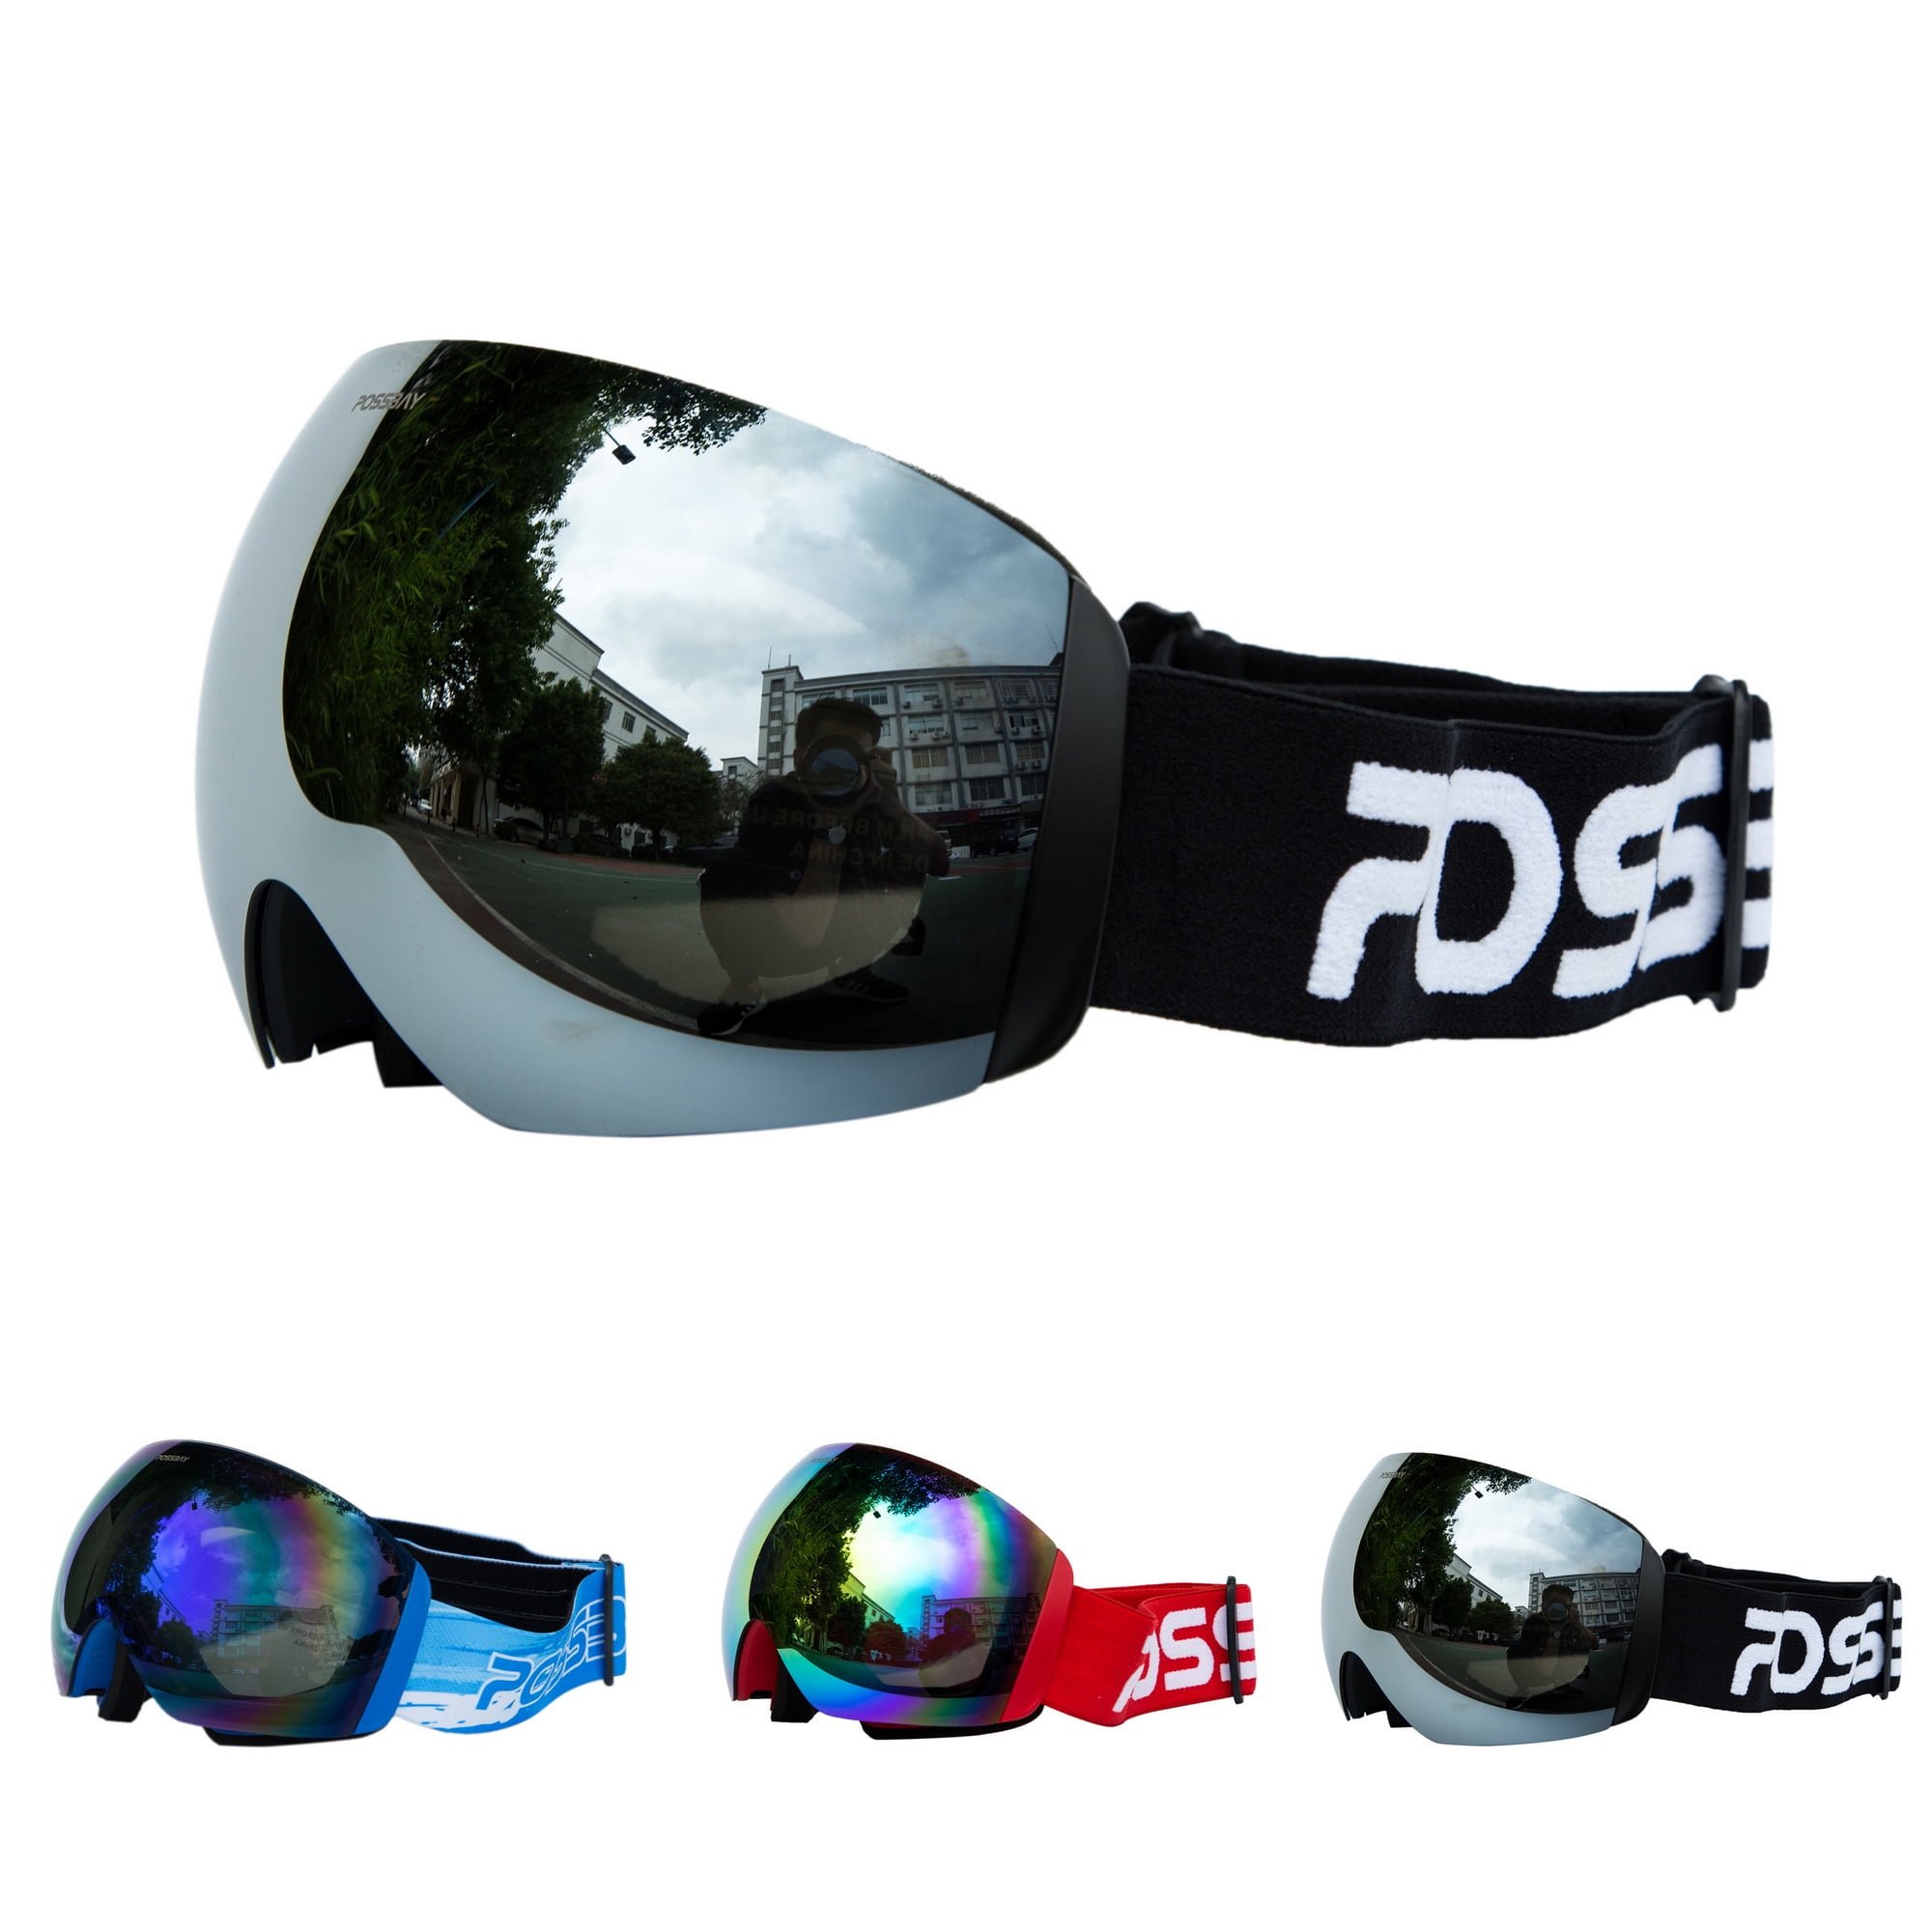 Details about   Professional Ski Goggles Double Layers UV400 Anti-Fog Skiing Glasses Snowboard 